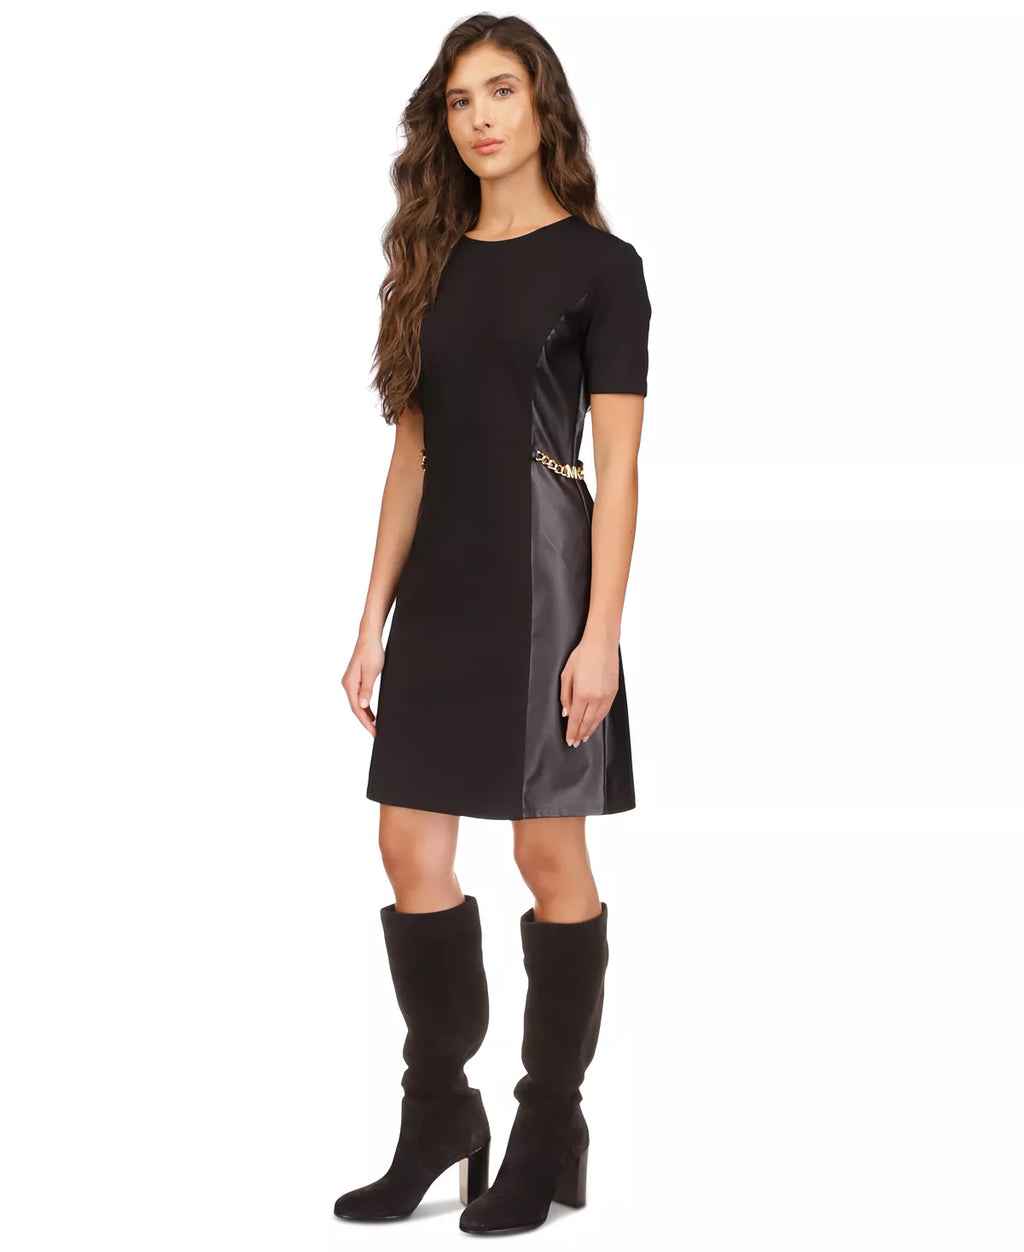 Faux-Leather Mixed-Media Chain Dress